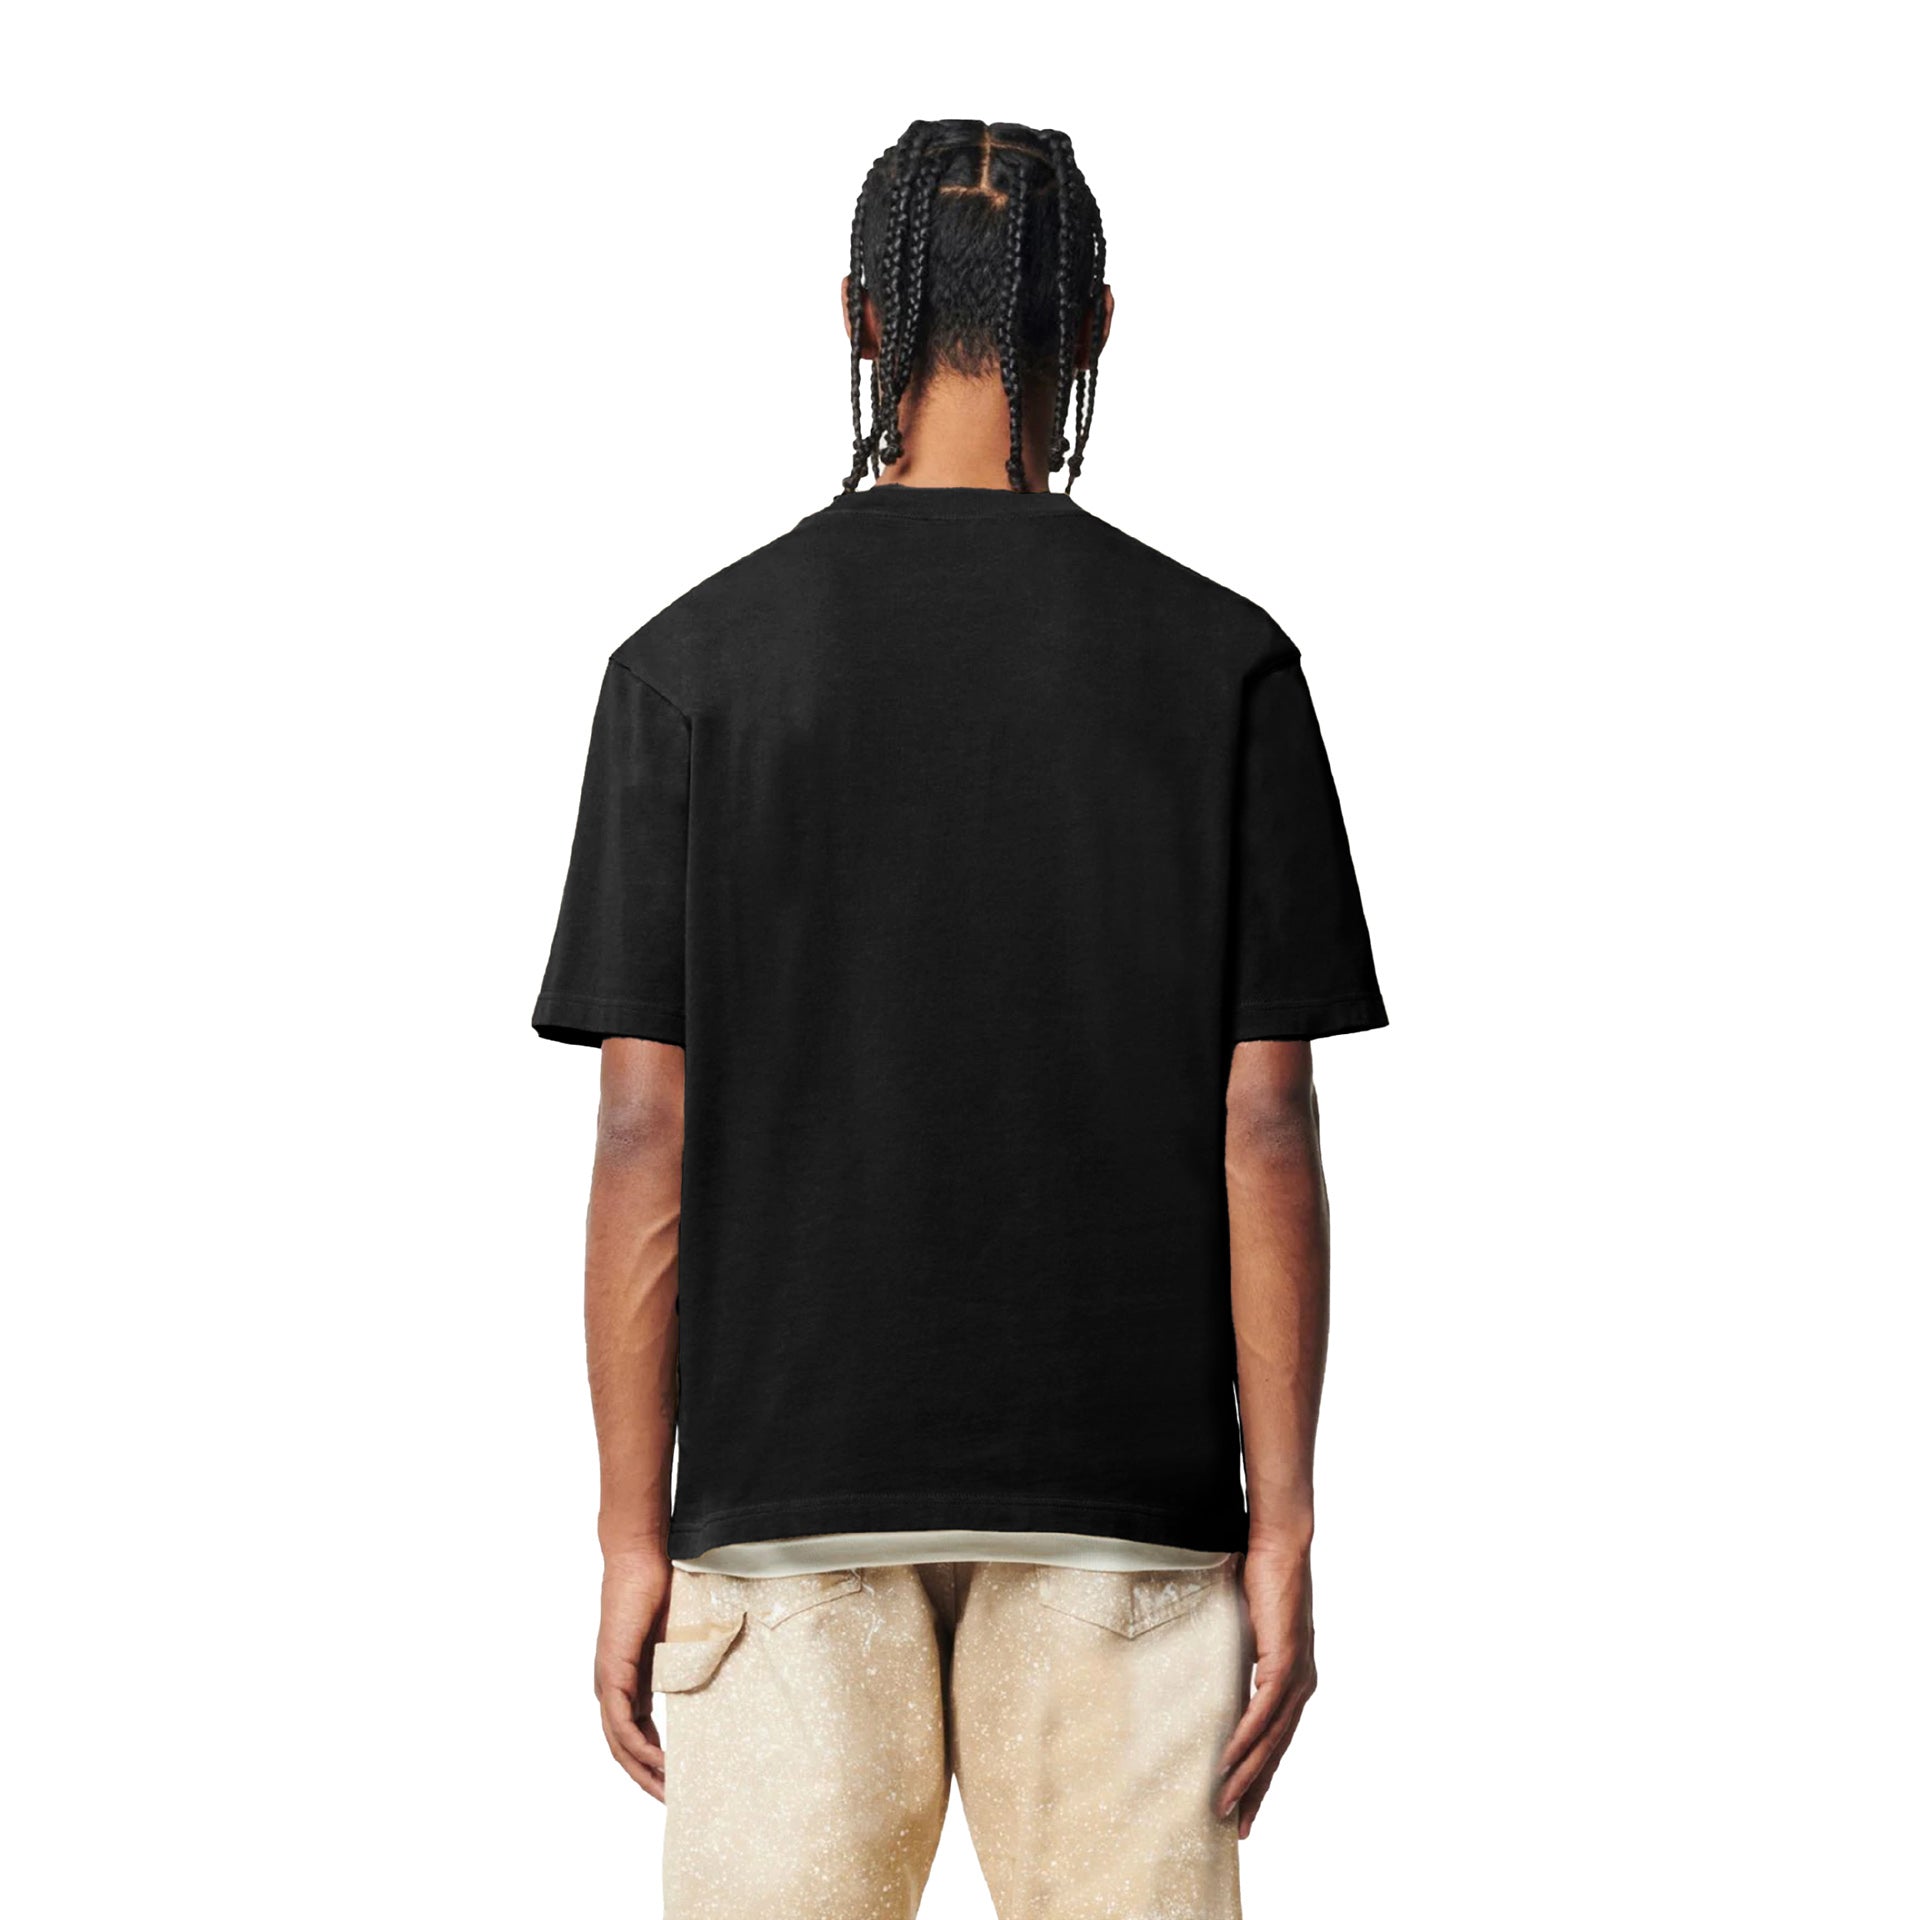 Black T-shirt From I'm West